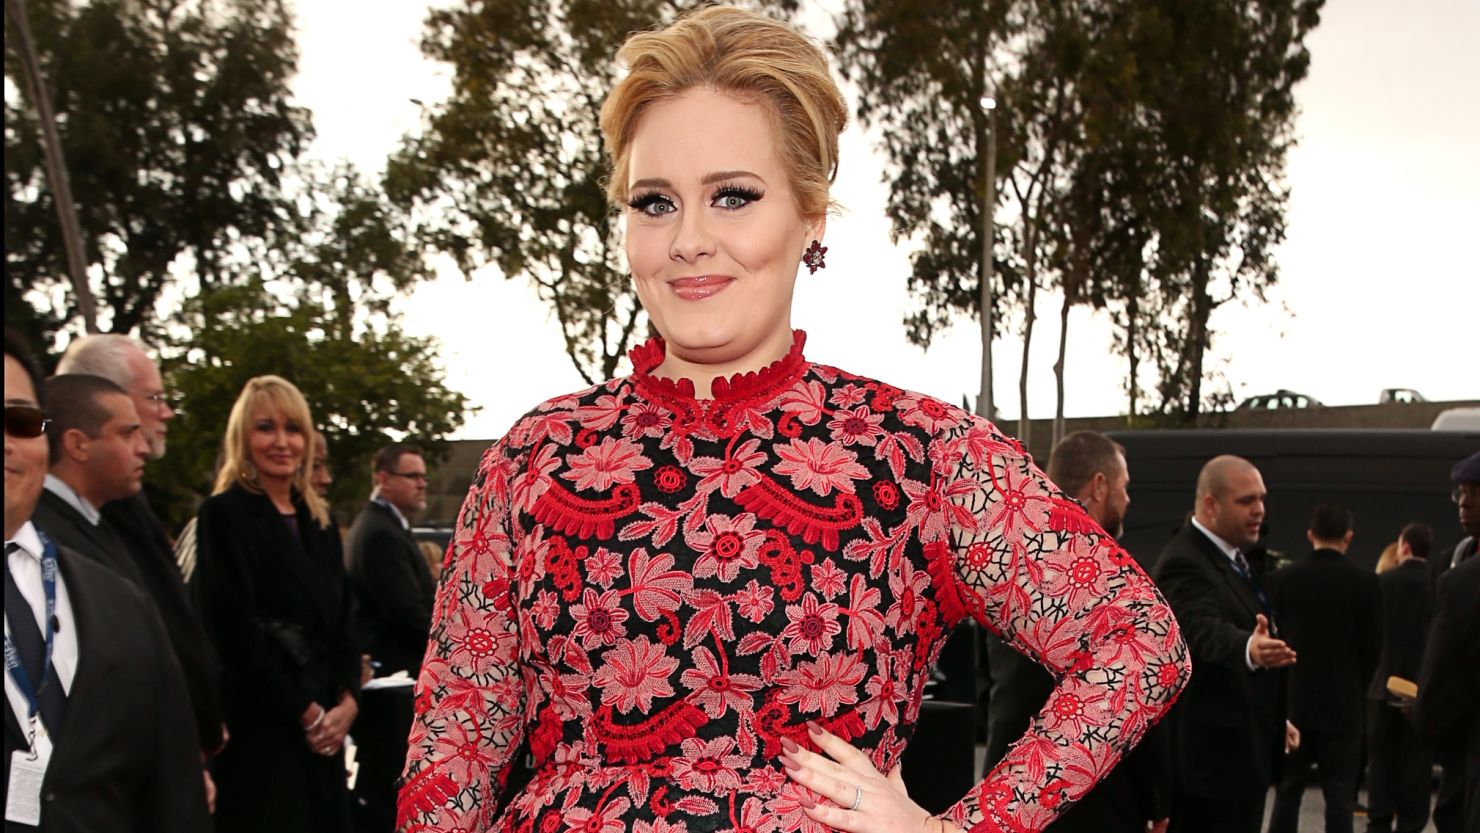 Adele stirred speculation that she'd release an album this year, but a financial report from her label says otherwise.